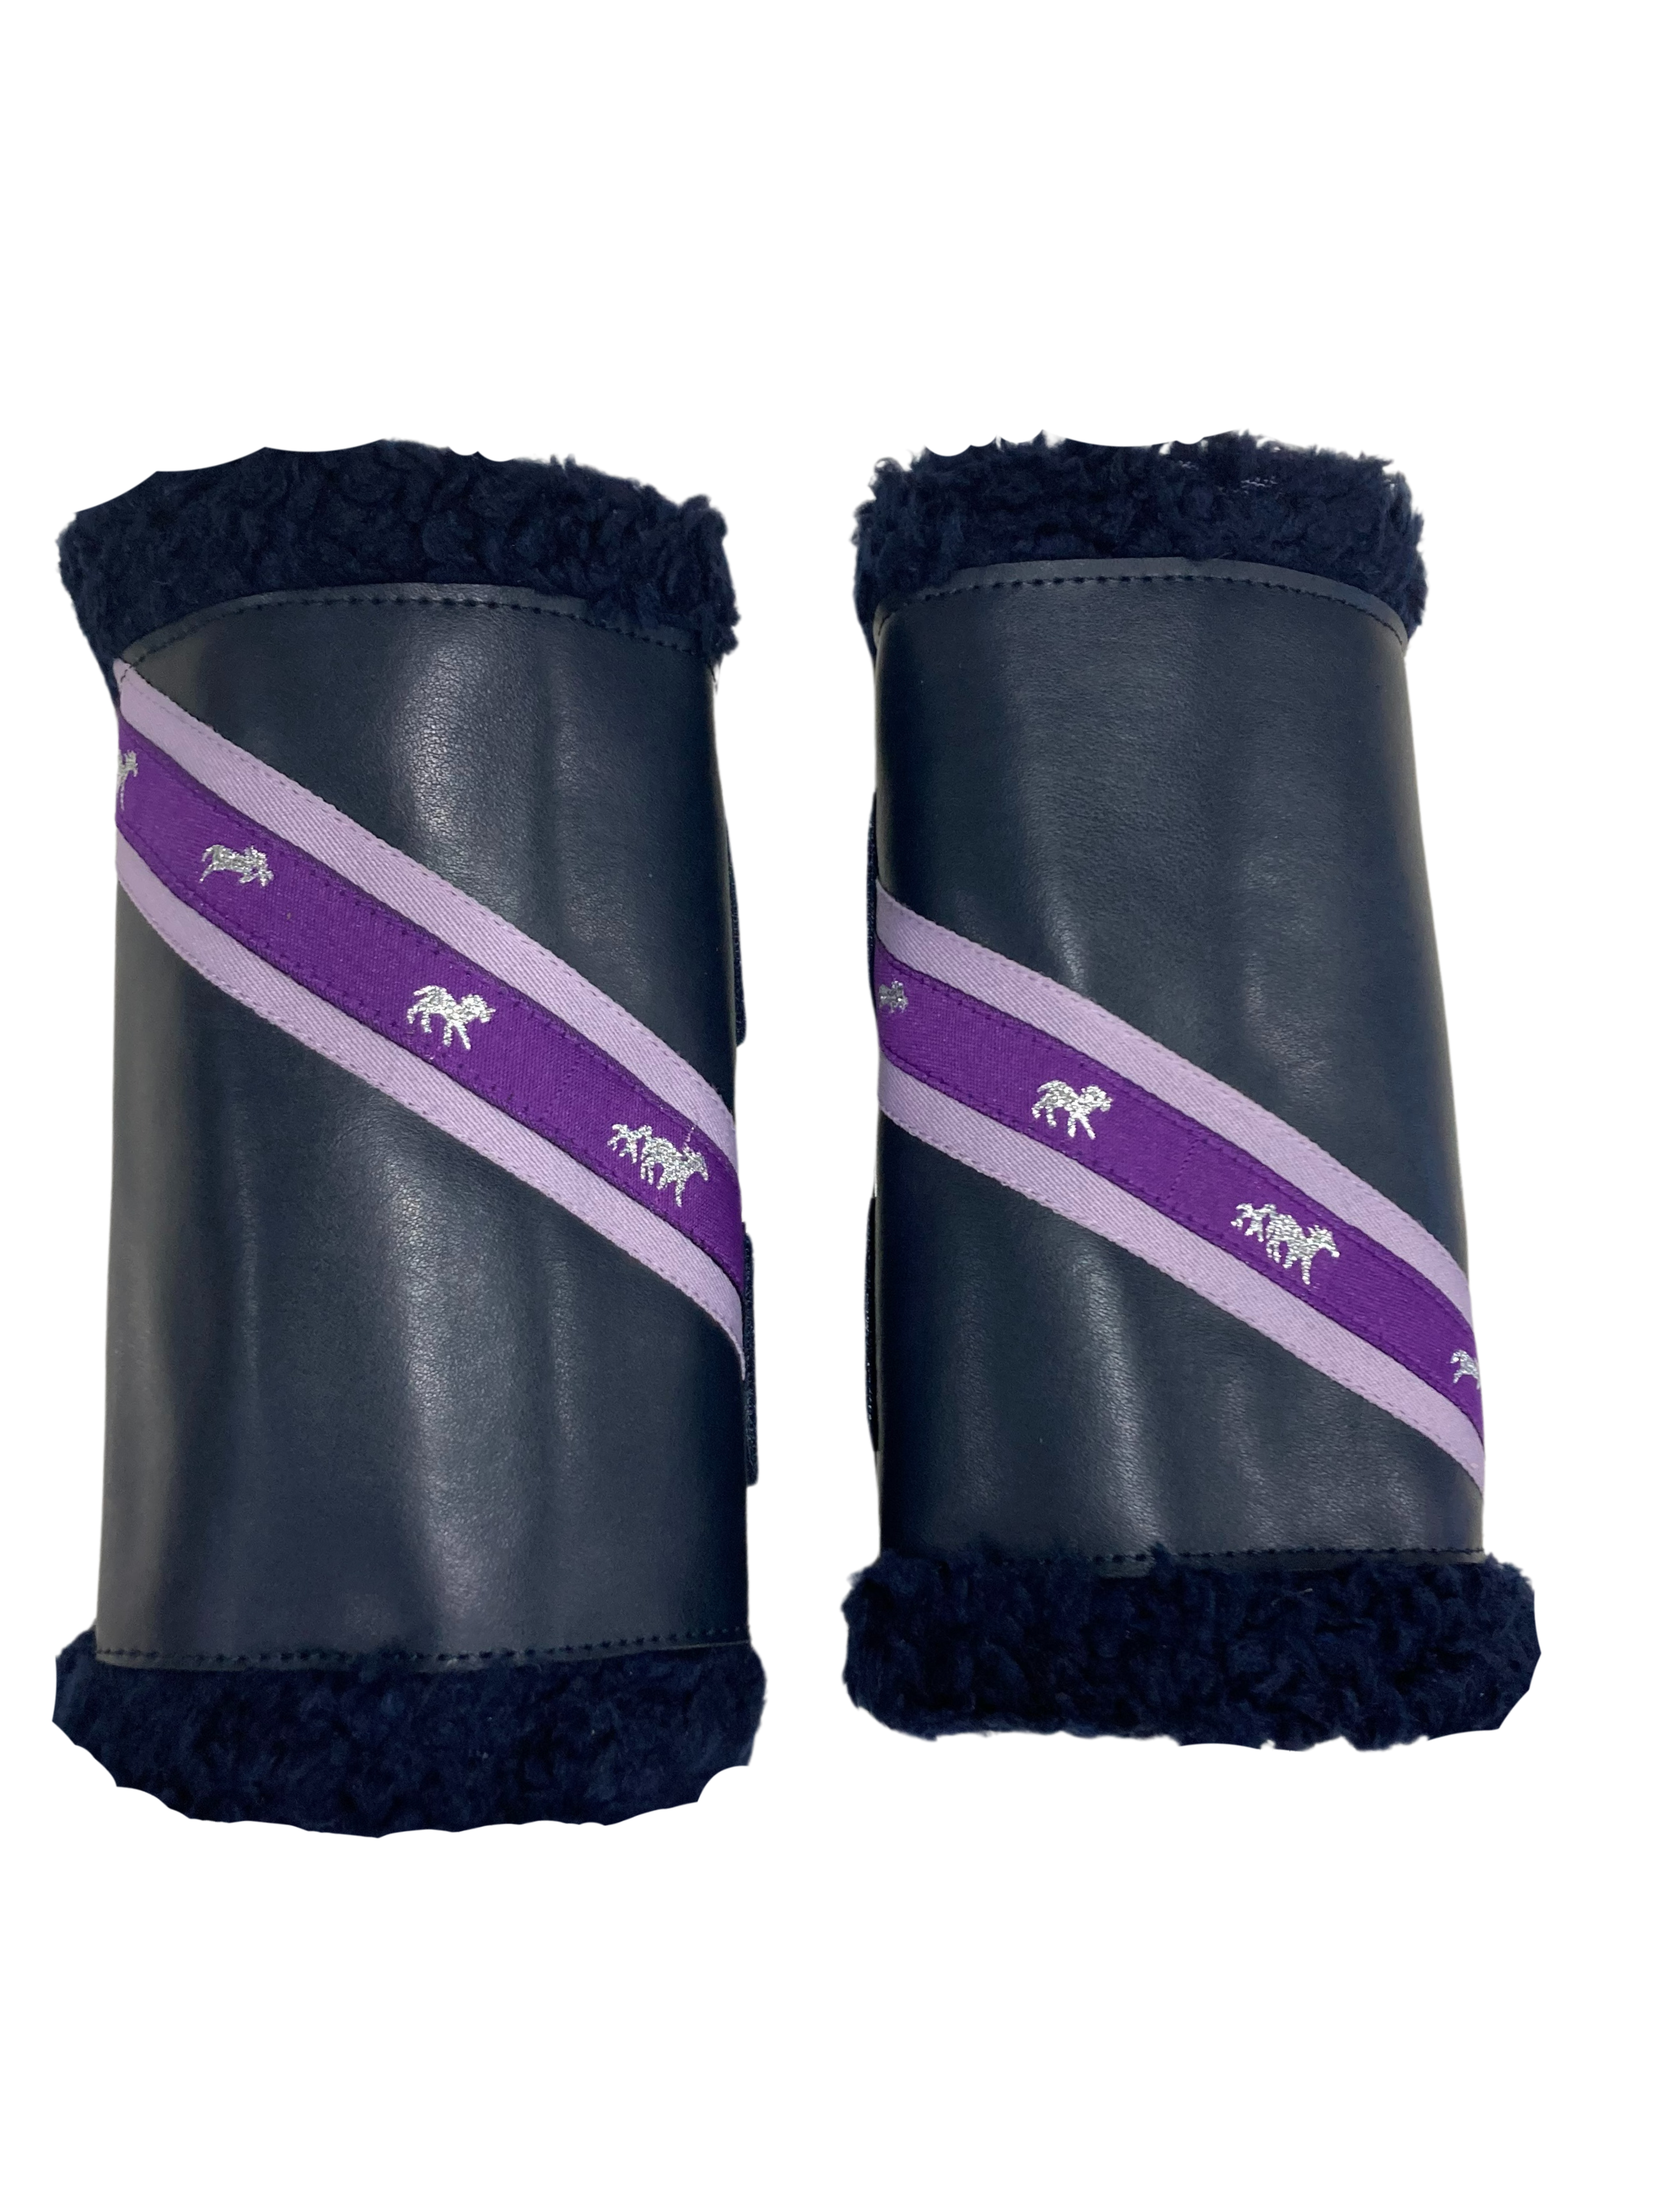 Sherpa Boots - Navy & Purple (Pair)